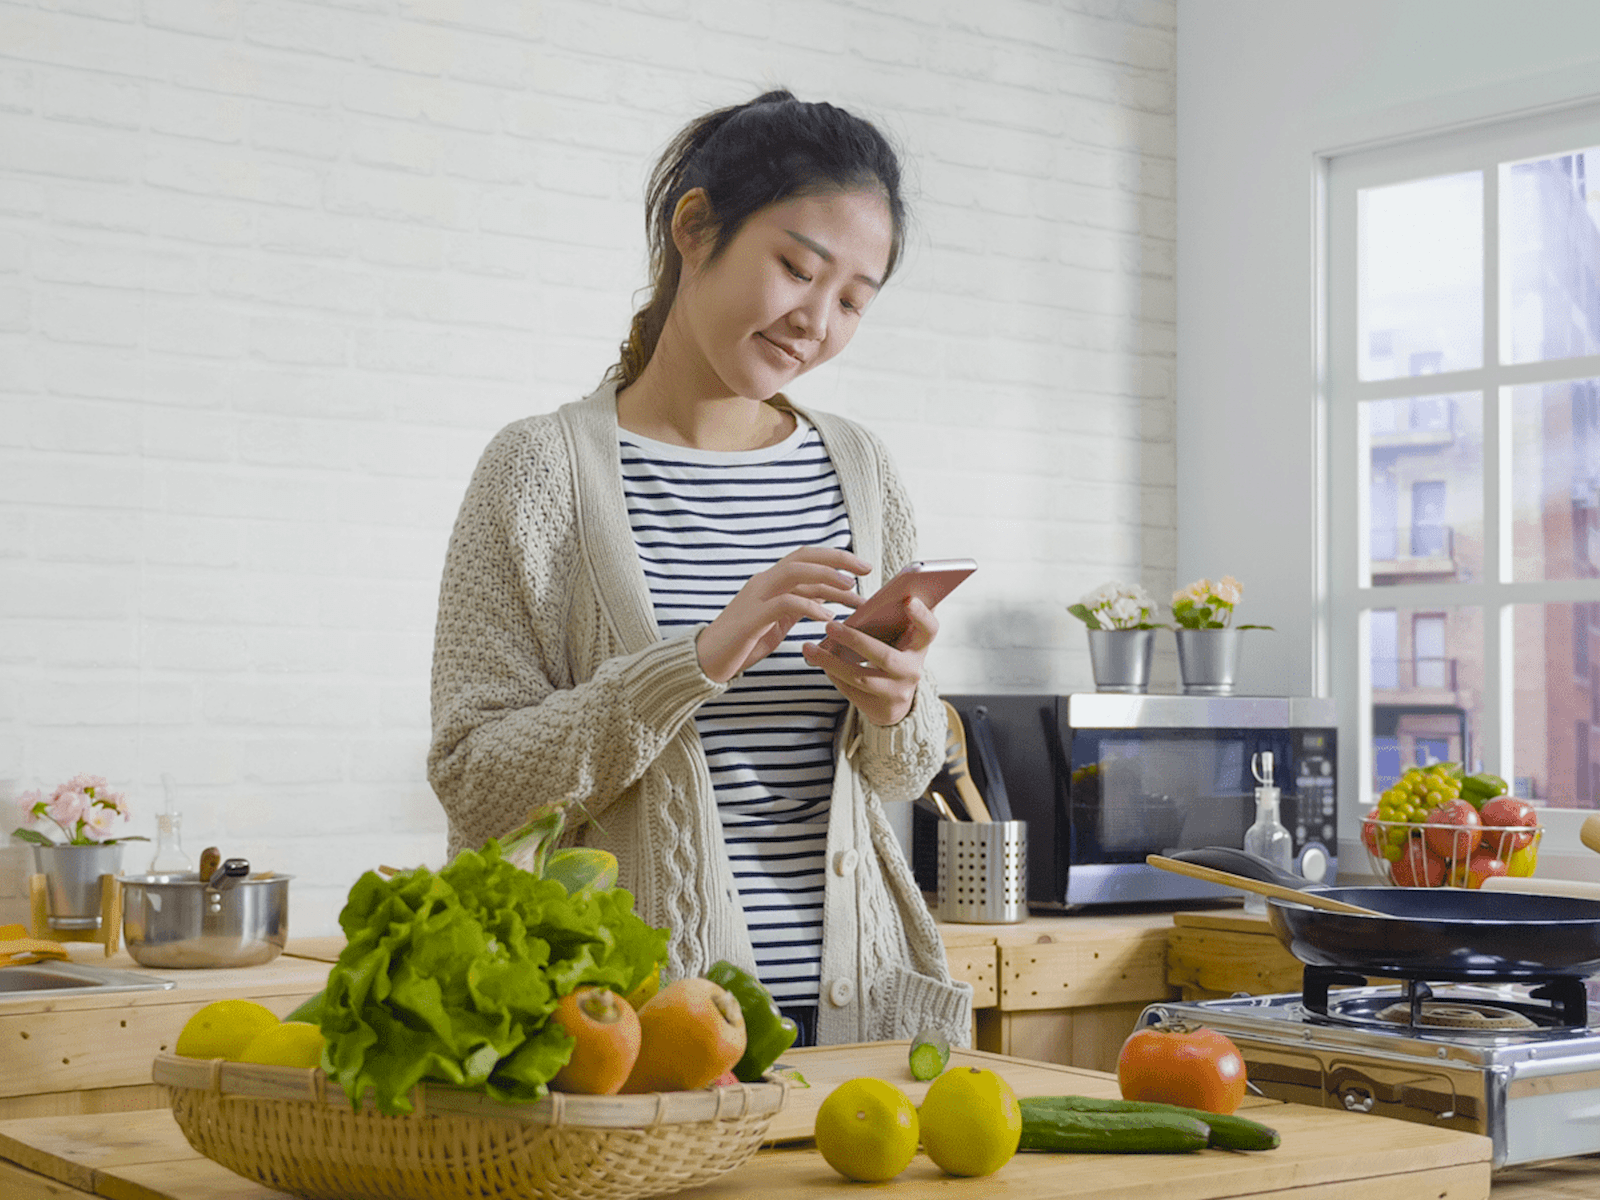 Young woman looking at her mobile phone whilst preparing food in her kitchen